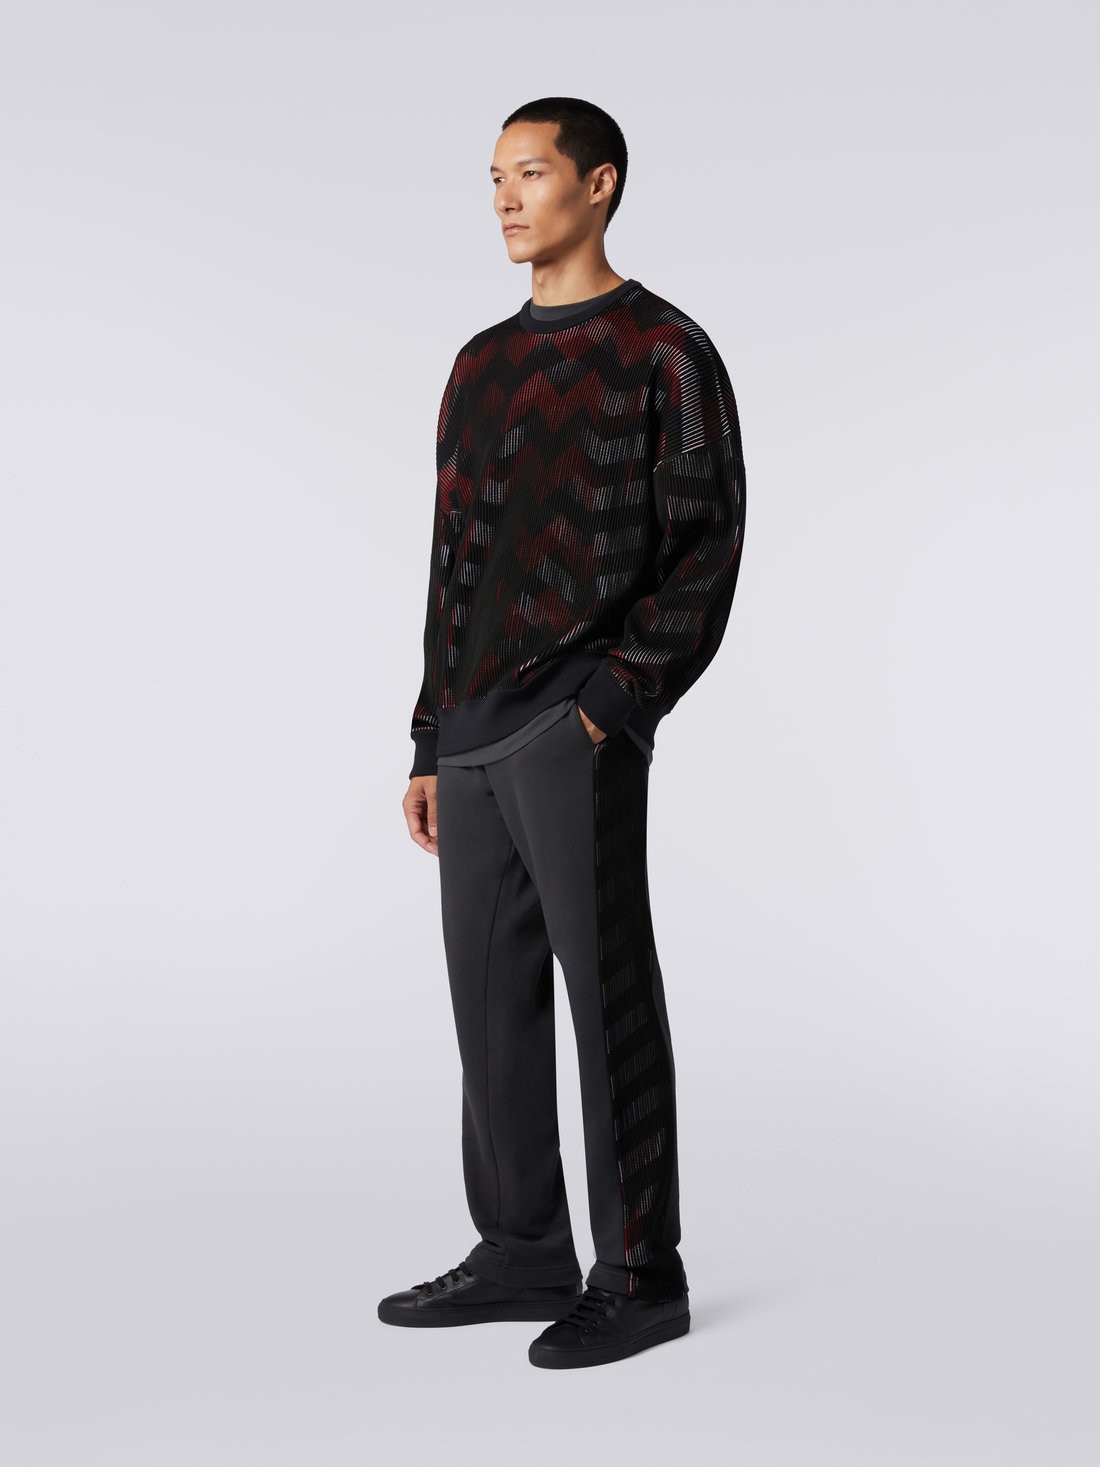 Cotton blend chevron crew-neck jumper in collaboration with Mike Maignan, Multicoloured - TS23SN07BK031MSM95A - 2